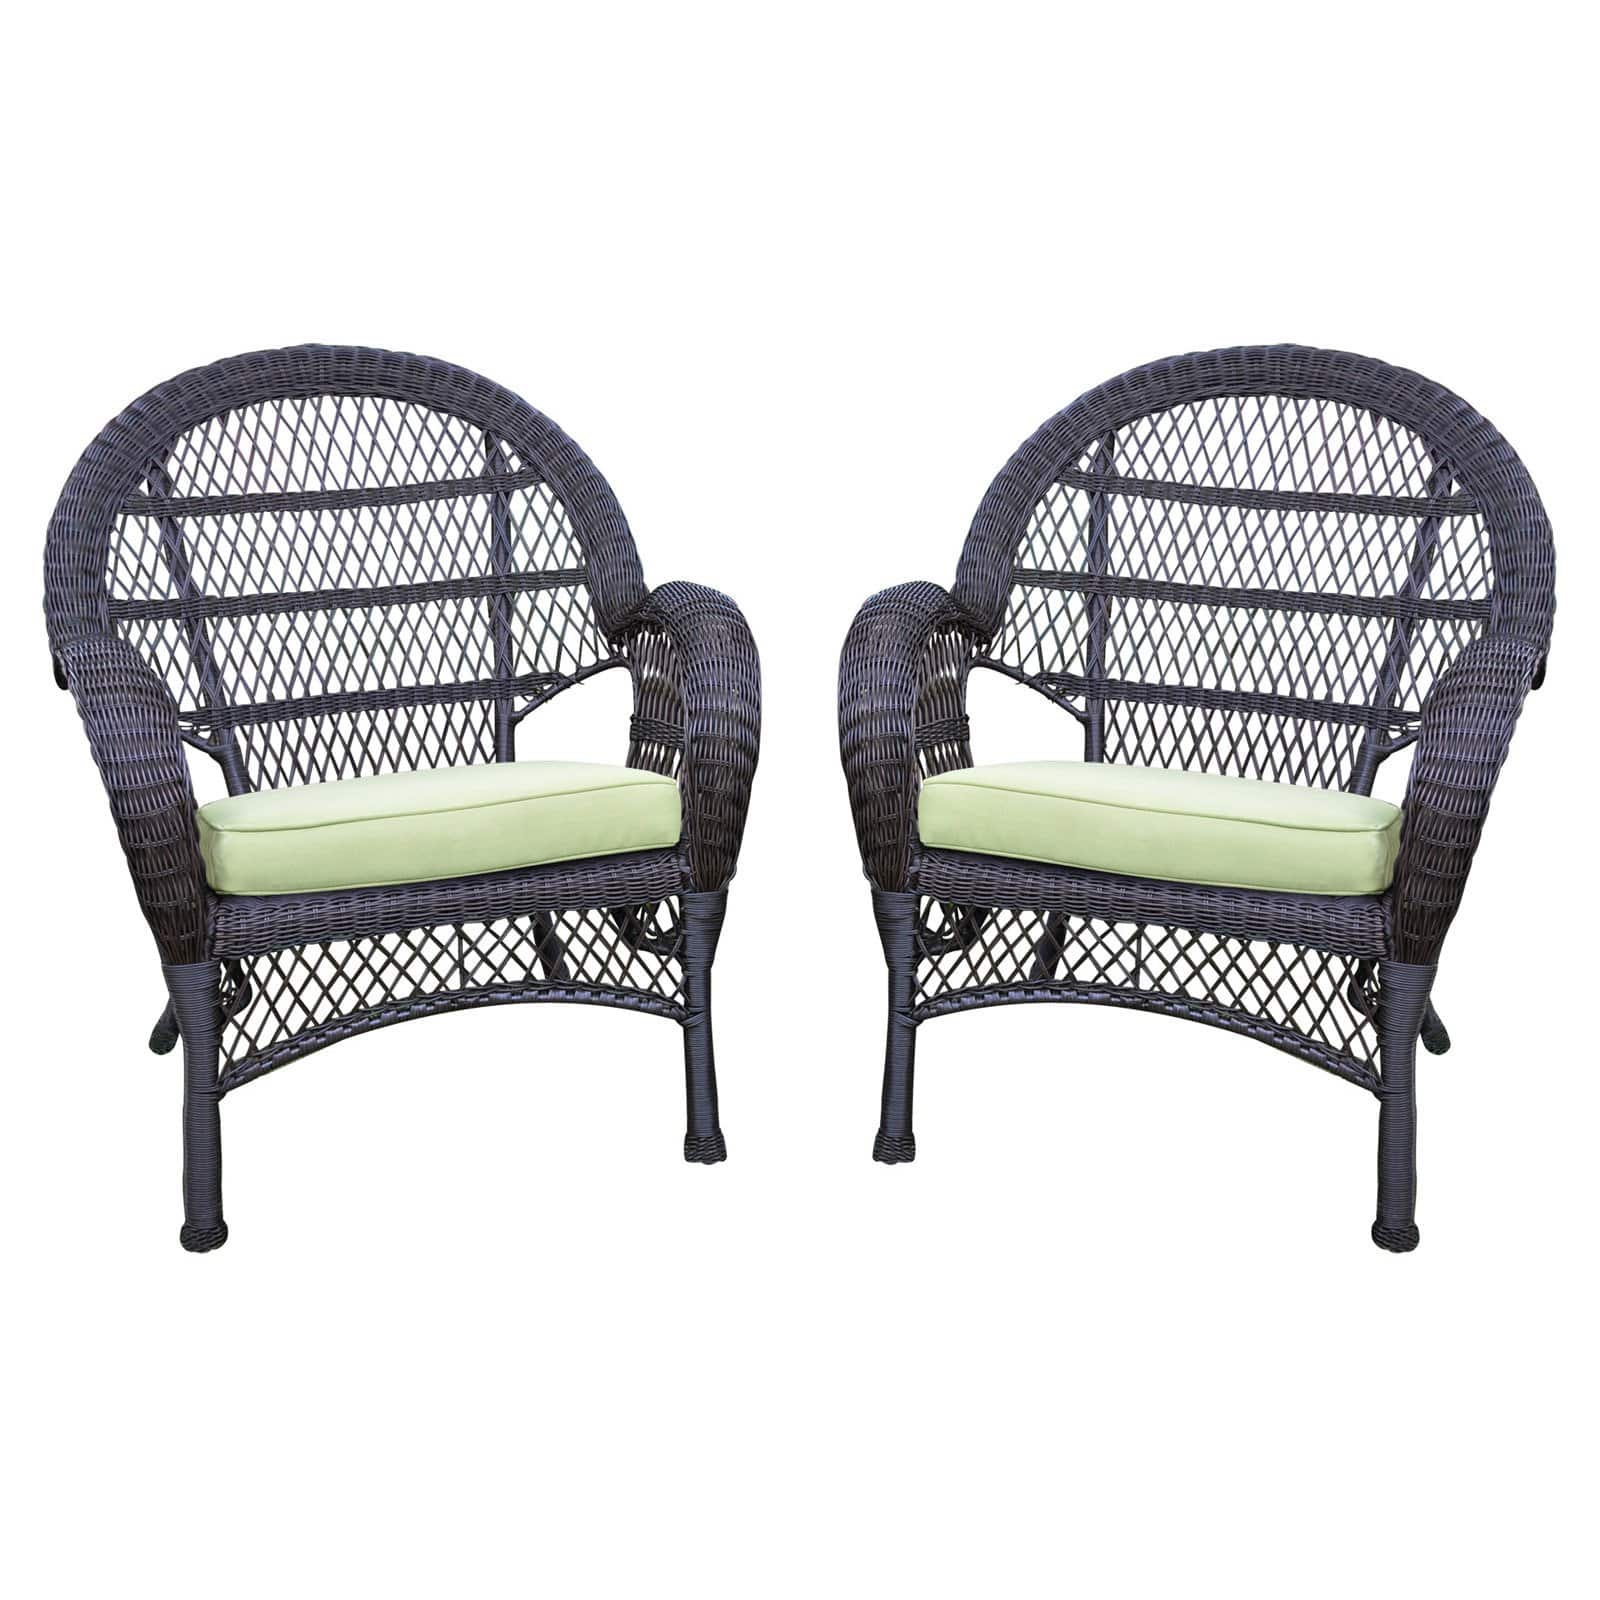 Jeco Wicker Chair in Espresso with Green Cushion (Set of 2) - image 1 of 11